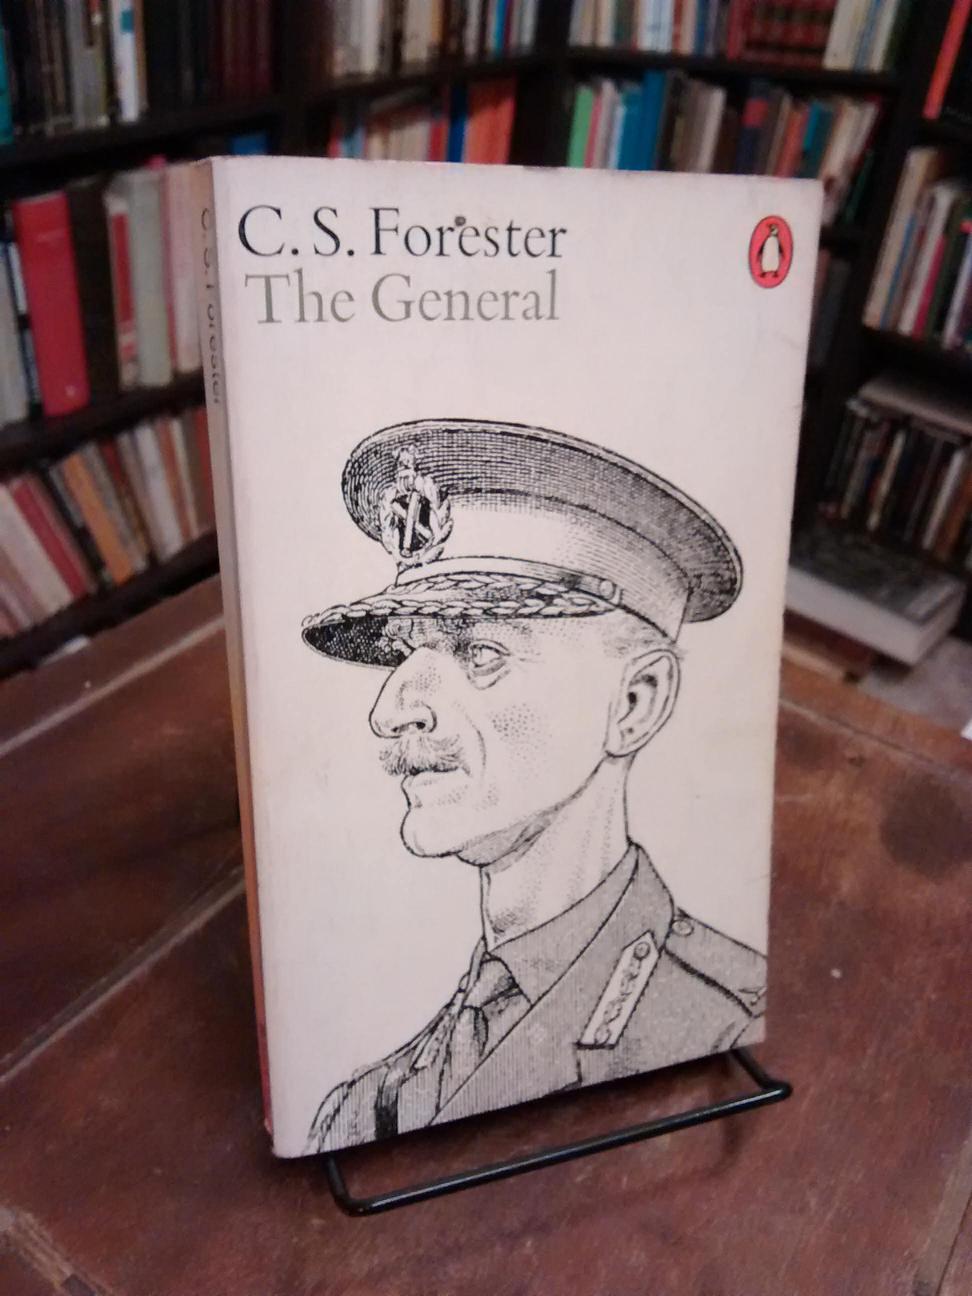 The General - C. S. Forester